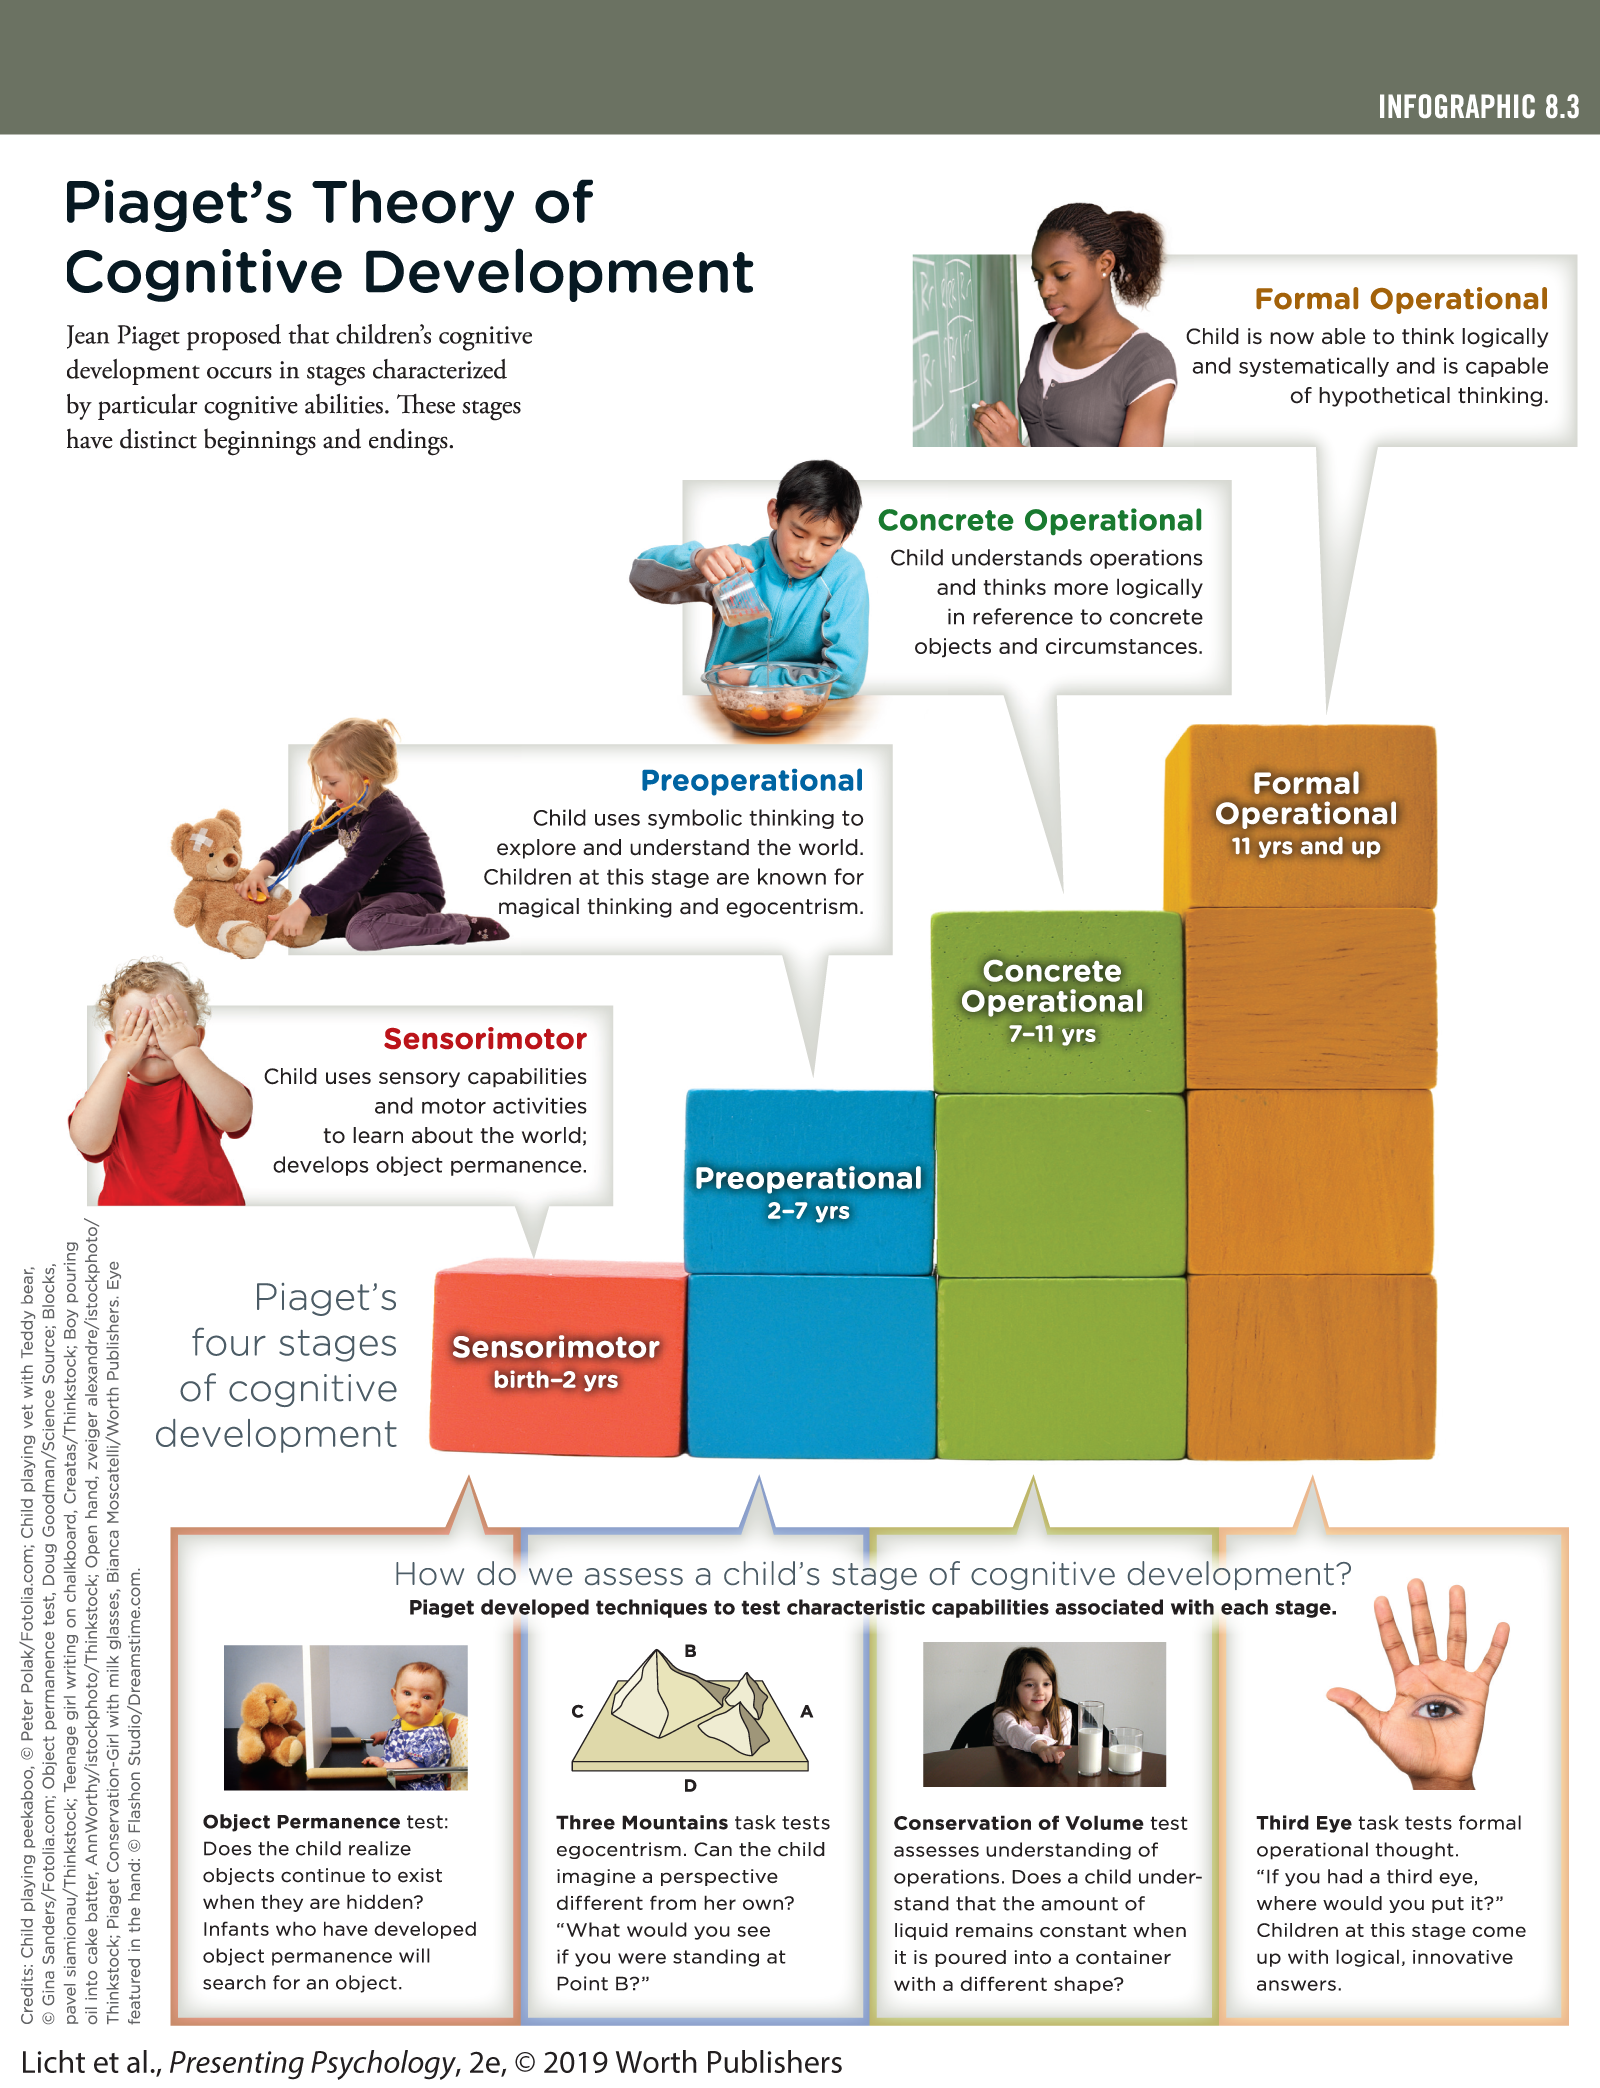 An infographic titled Piaget’s Theory of Cognitive Development shows four stages of cognitive development. You can read full description from the link below